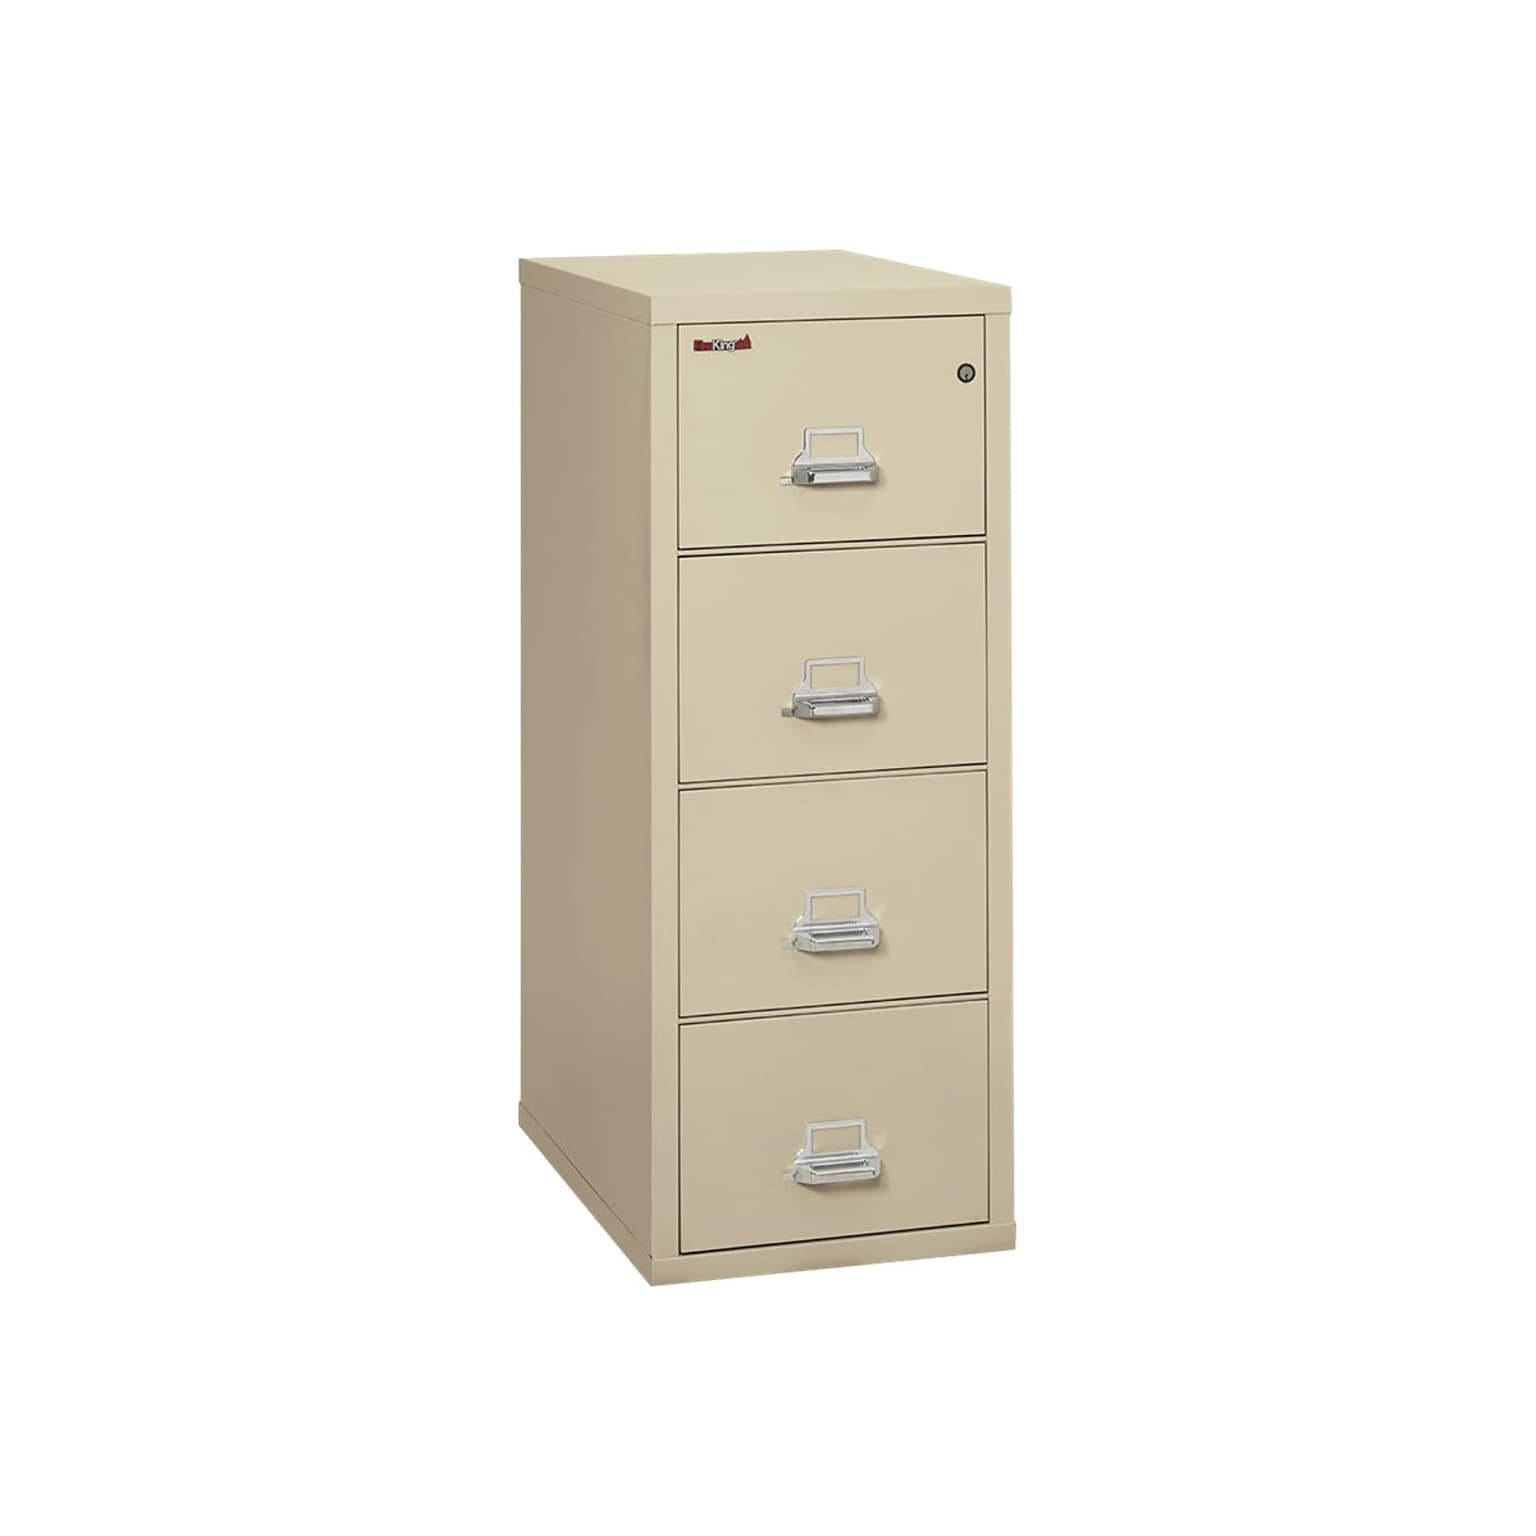 FireKing Classic 4-Drawer Vertical File Cabinet, Fire Resistant, Legal, Parchment, 31.56D (4-2131-CPA)